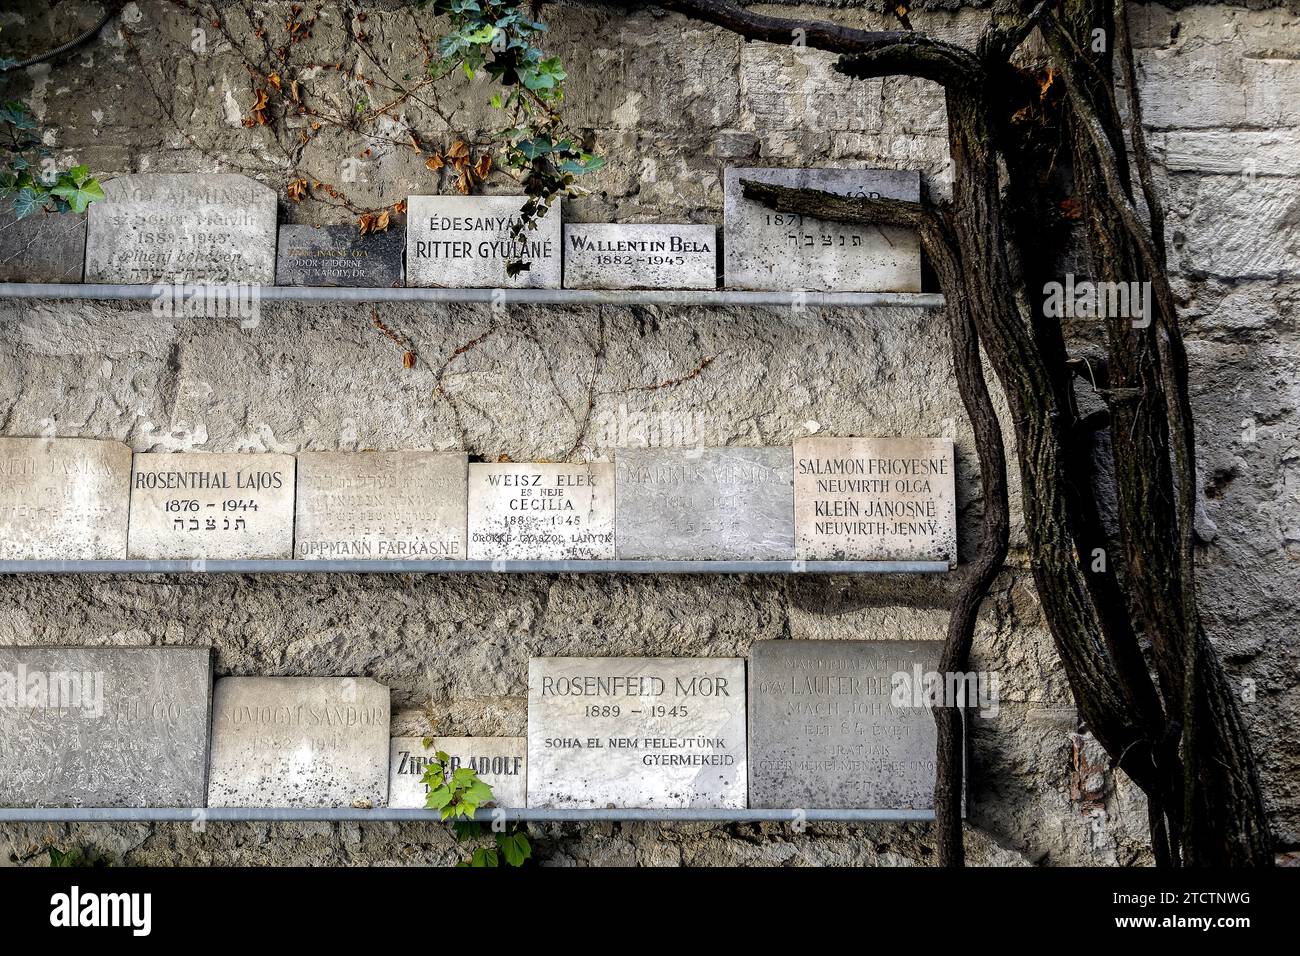 Cemetery of the Great synagogue of Budapest, Hungary Stock Photo